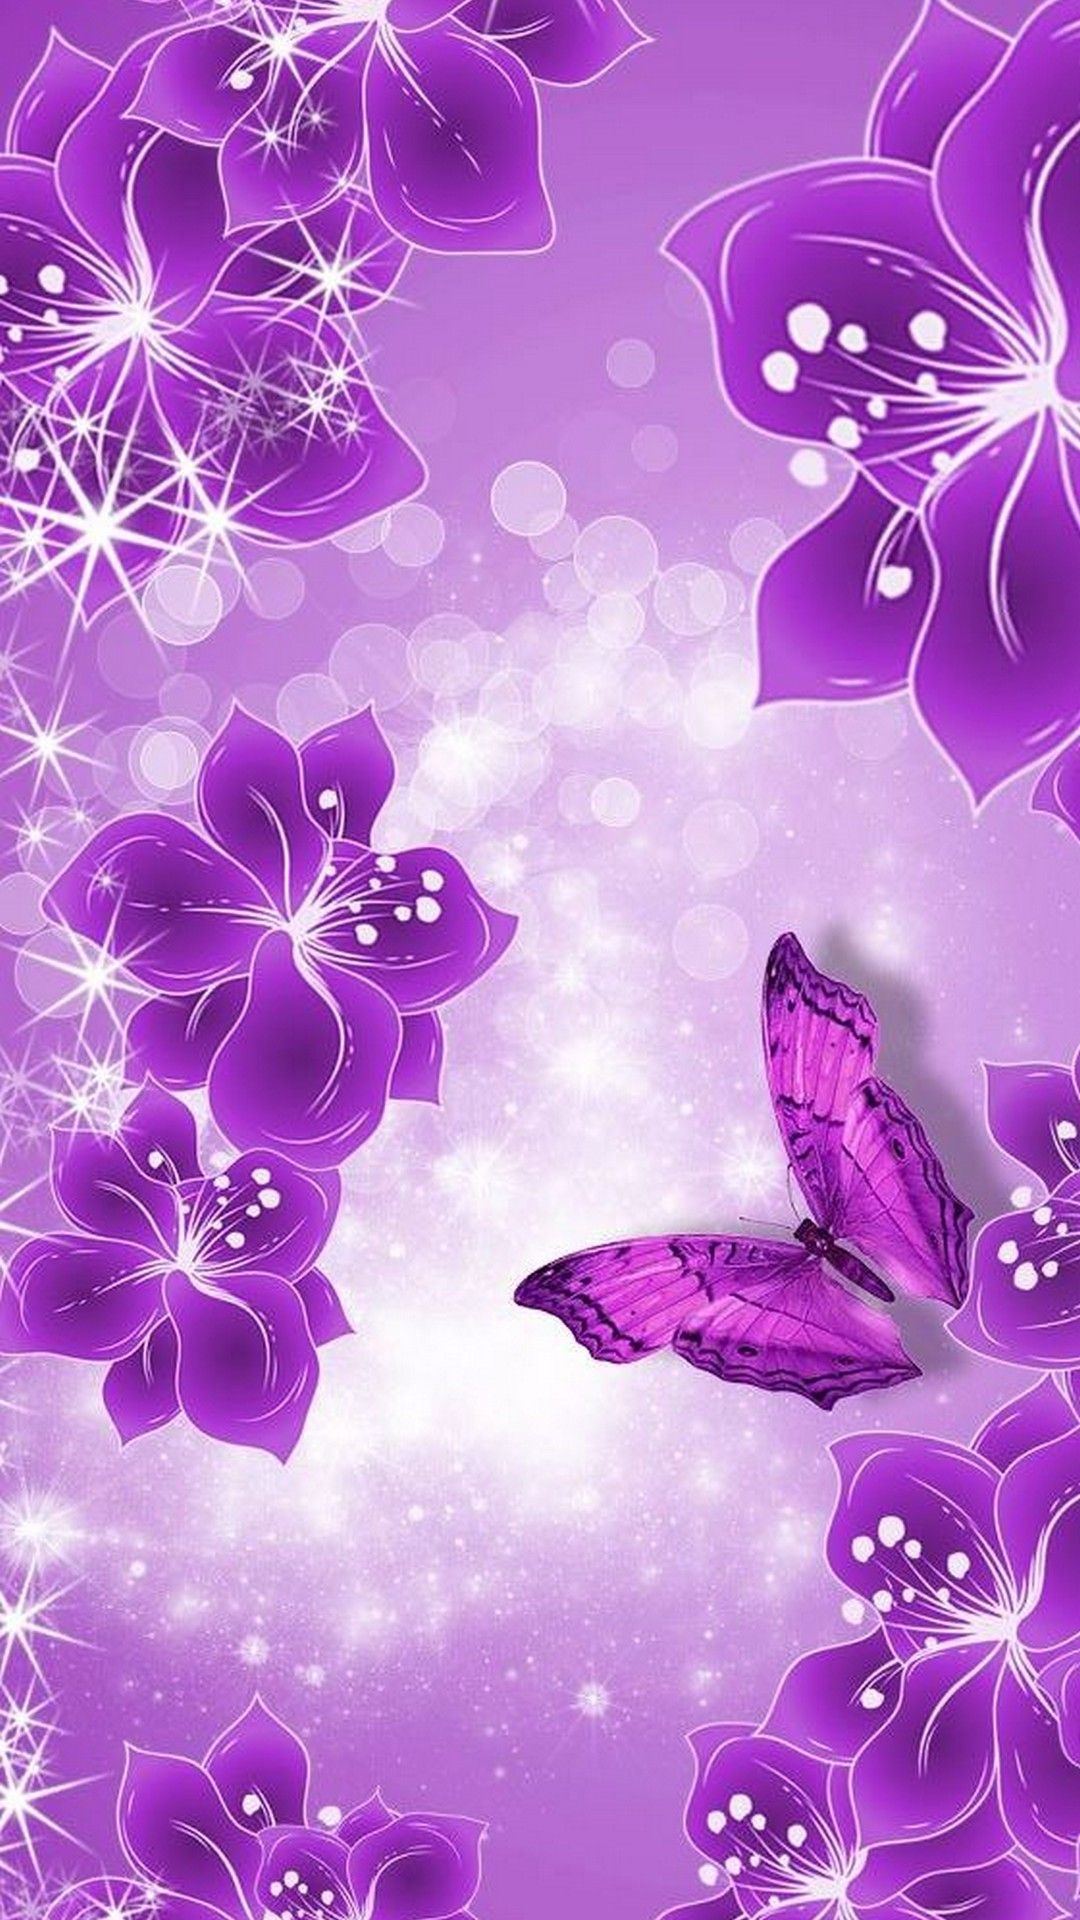 1080x1920 Purple Butterfly HD Wallpapers For Mobile is best high definition wallpaper image 2018. You can use this wallpa&acirc;&#128;&brvbar; | Purple art, Purple wallpaper, Butterfly wallpaper